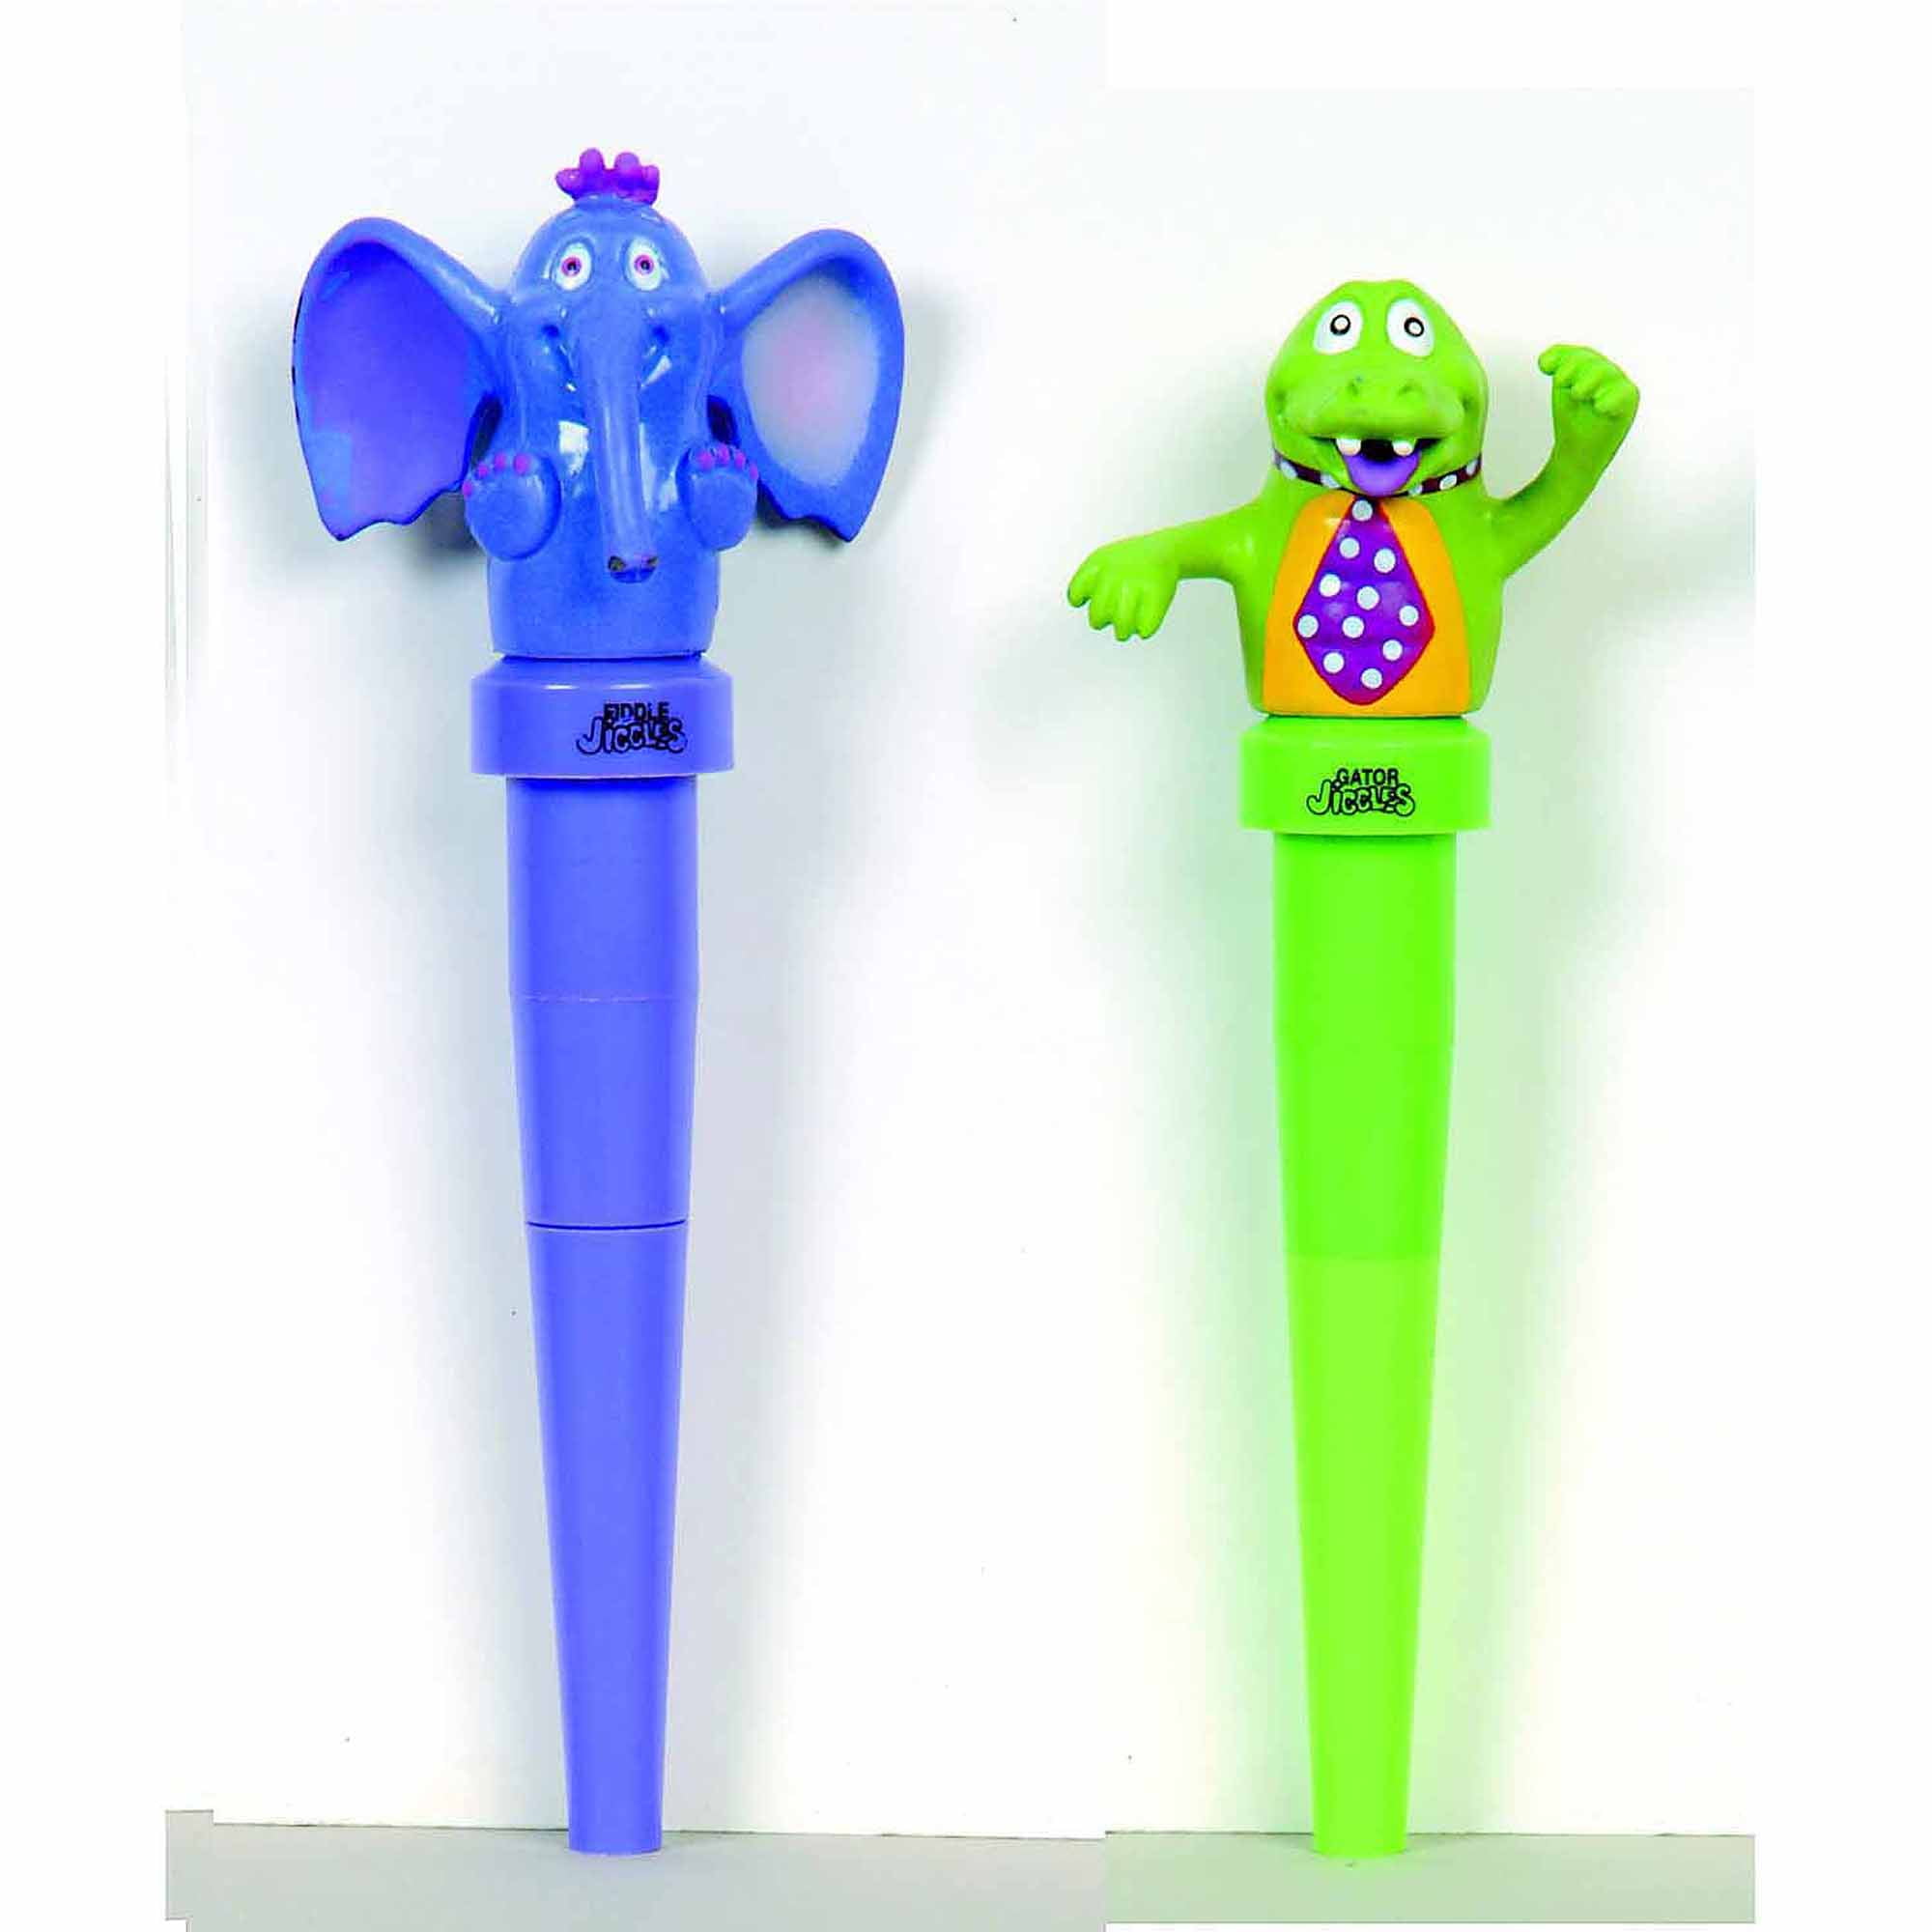 Pair of 2 Abilitations Jigglers Massager Elephant and Gator Chewable Oral Massager